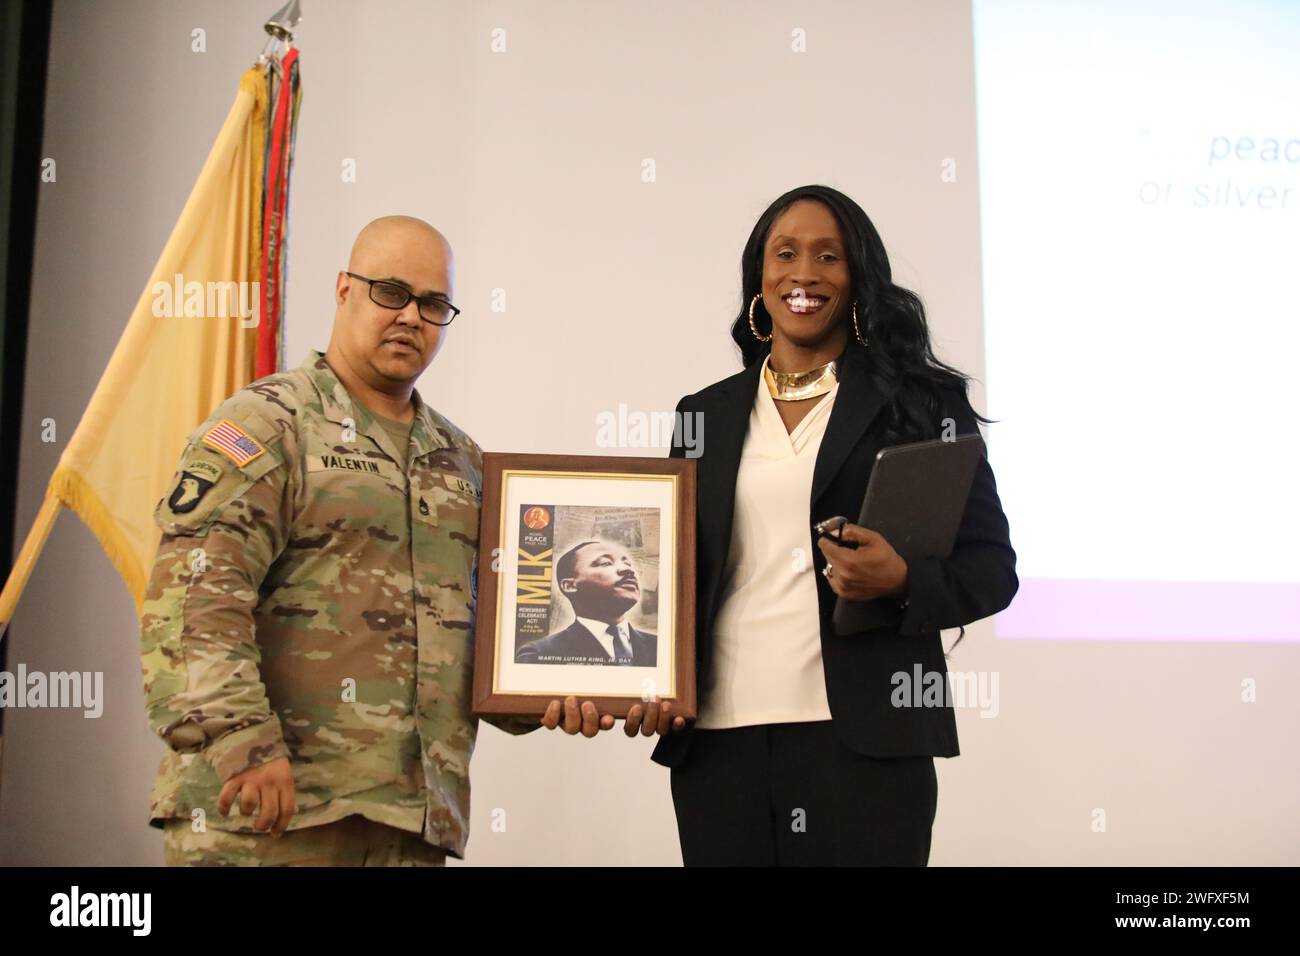 U.S. Army Capt. Chaplain Tammy Briggs receives a token of appreciation for being the guest speaker during the MLK ceremony. Stock Photo